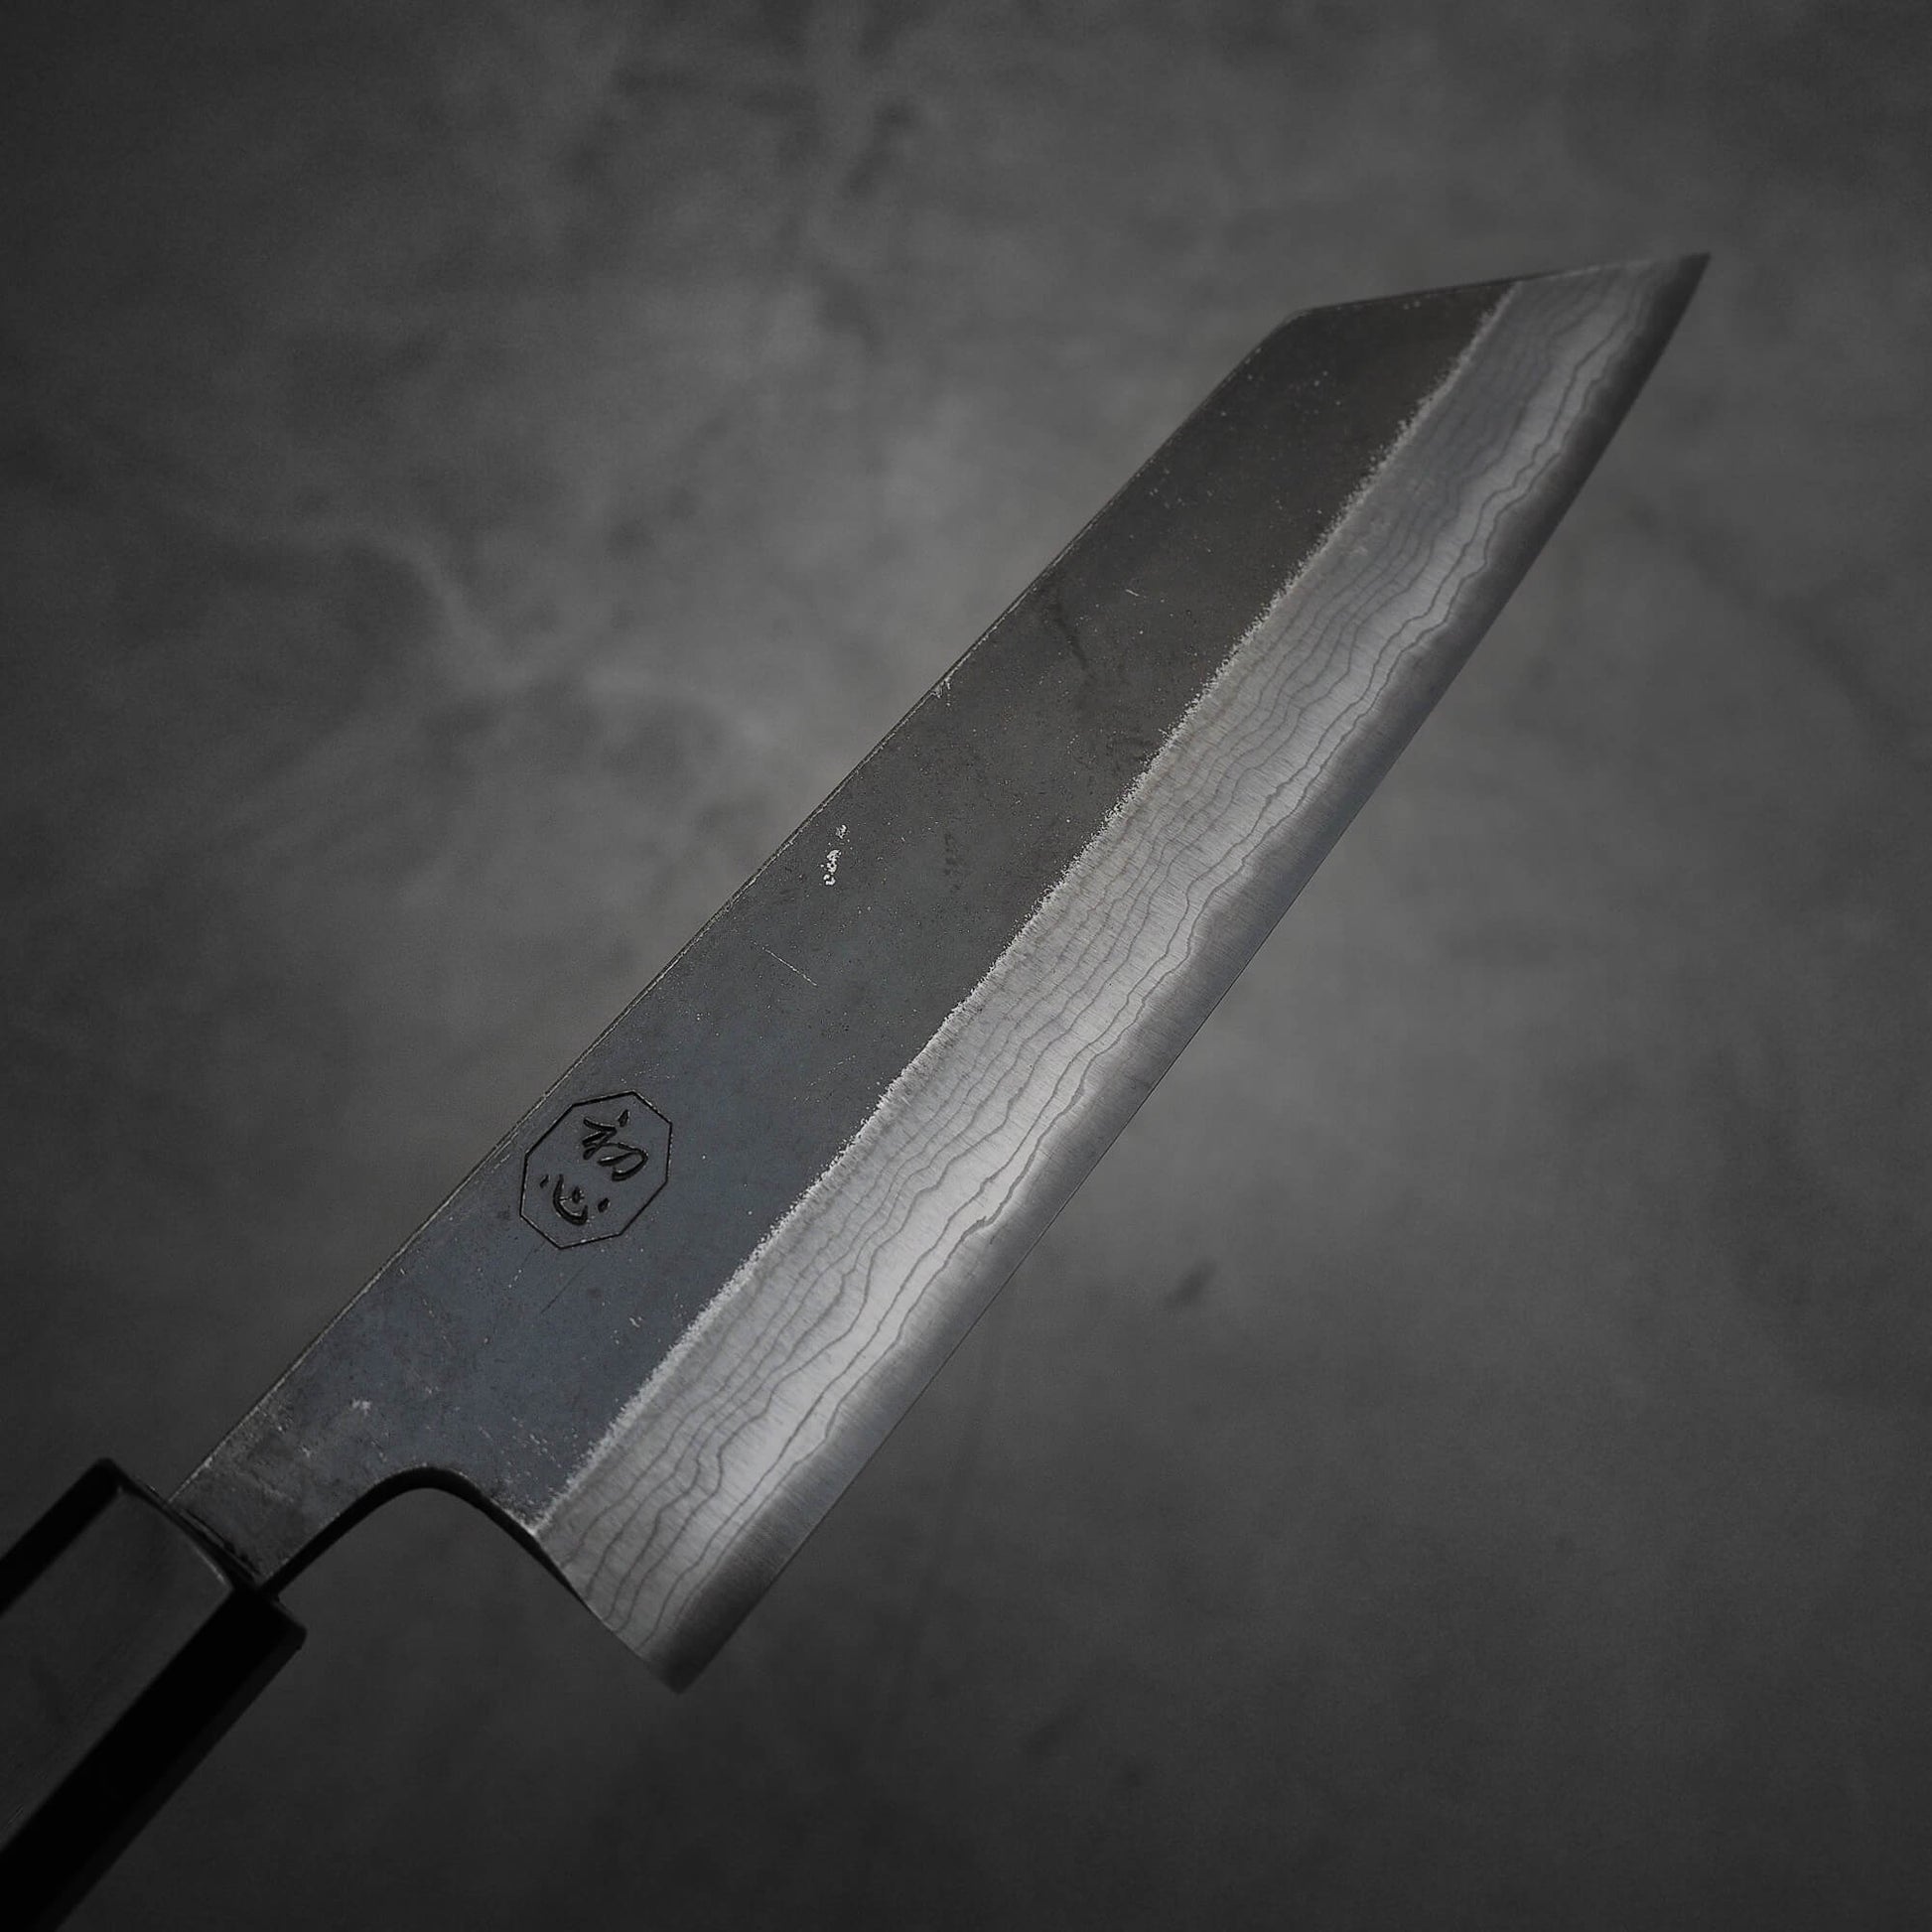 Top view of the blade of Hatsukokoro Kumokage kurouchi damascus aogami#2 bunka knife. Image shows the right side of the blade